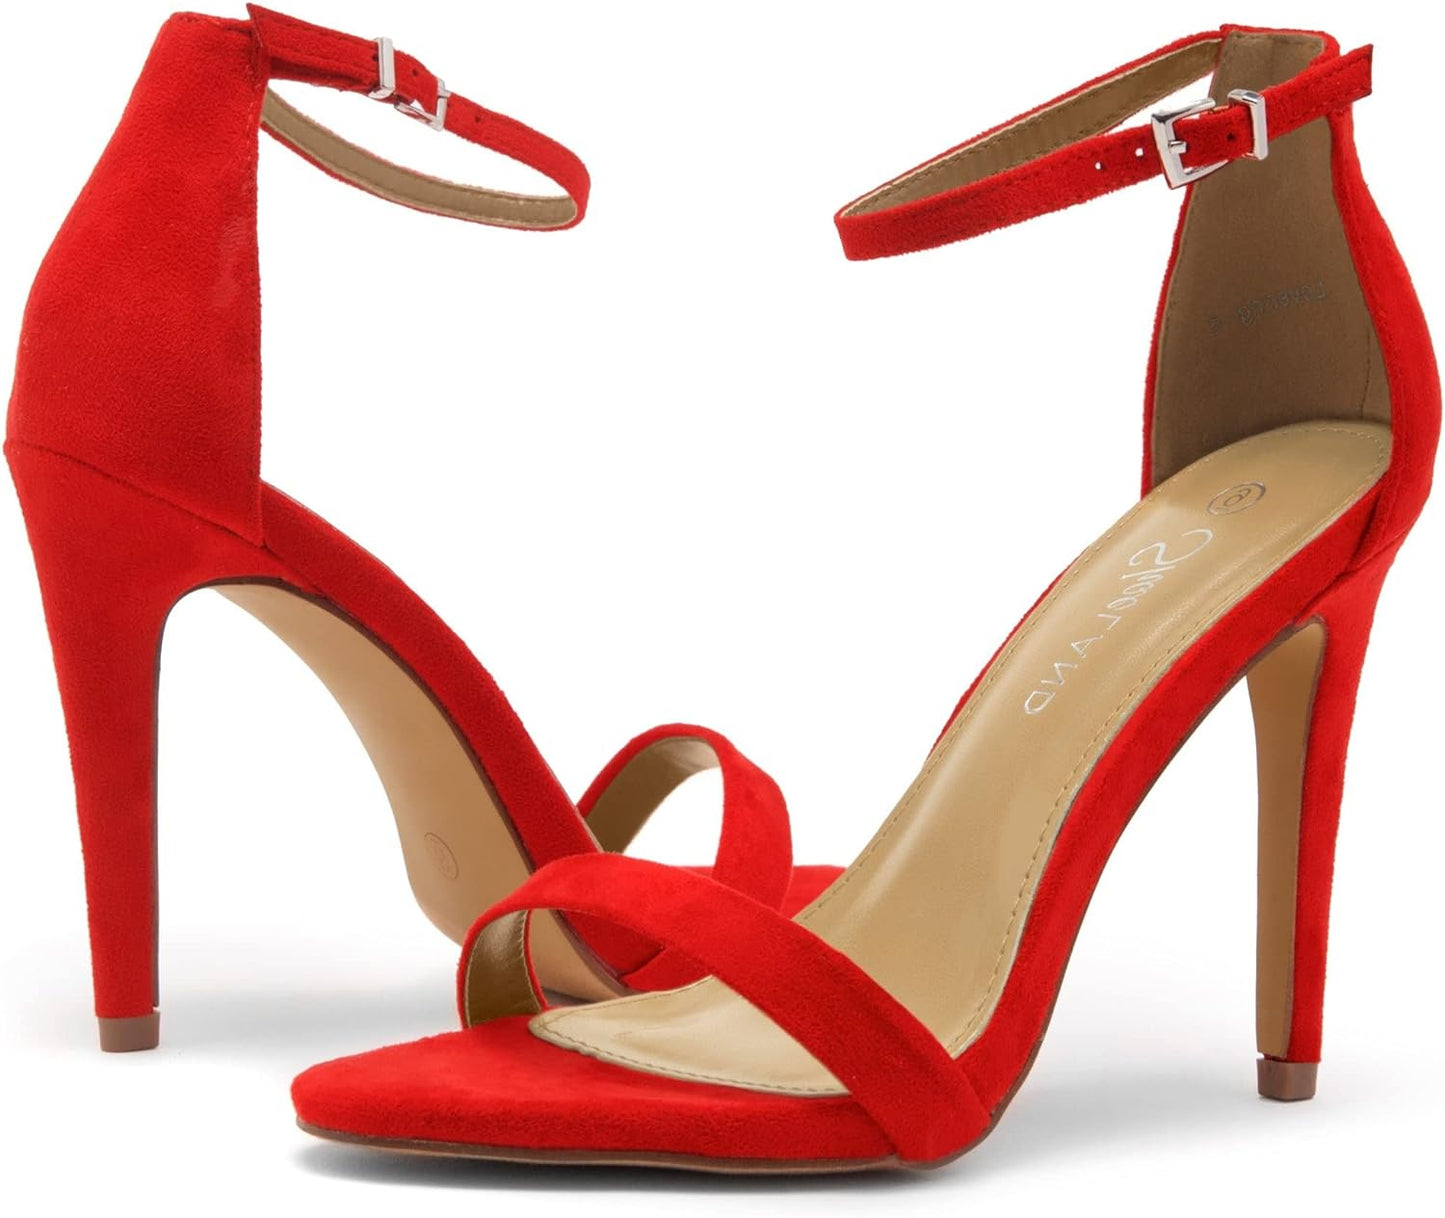 "Stunning Women'S Stiletto Heel Dress Sandals - Perfect for Weddings and Parties!"